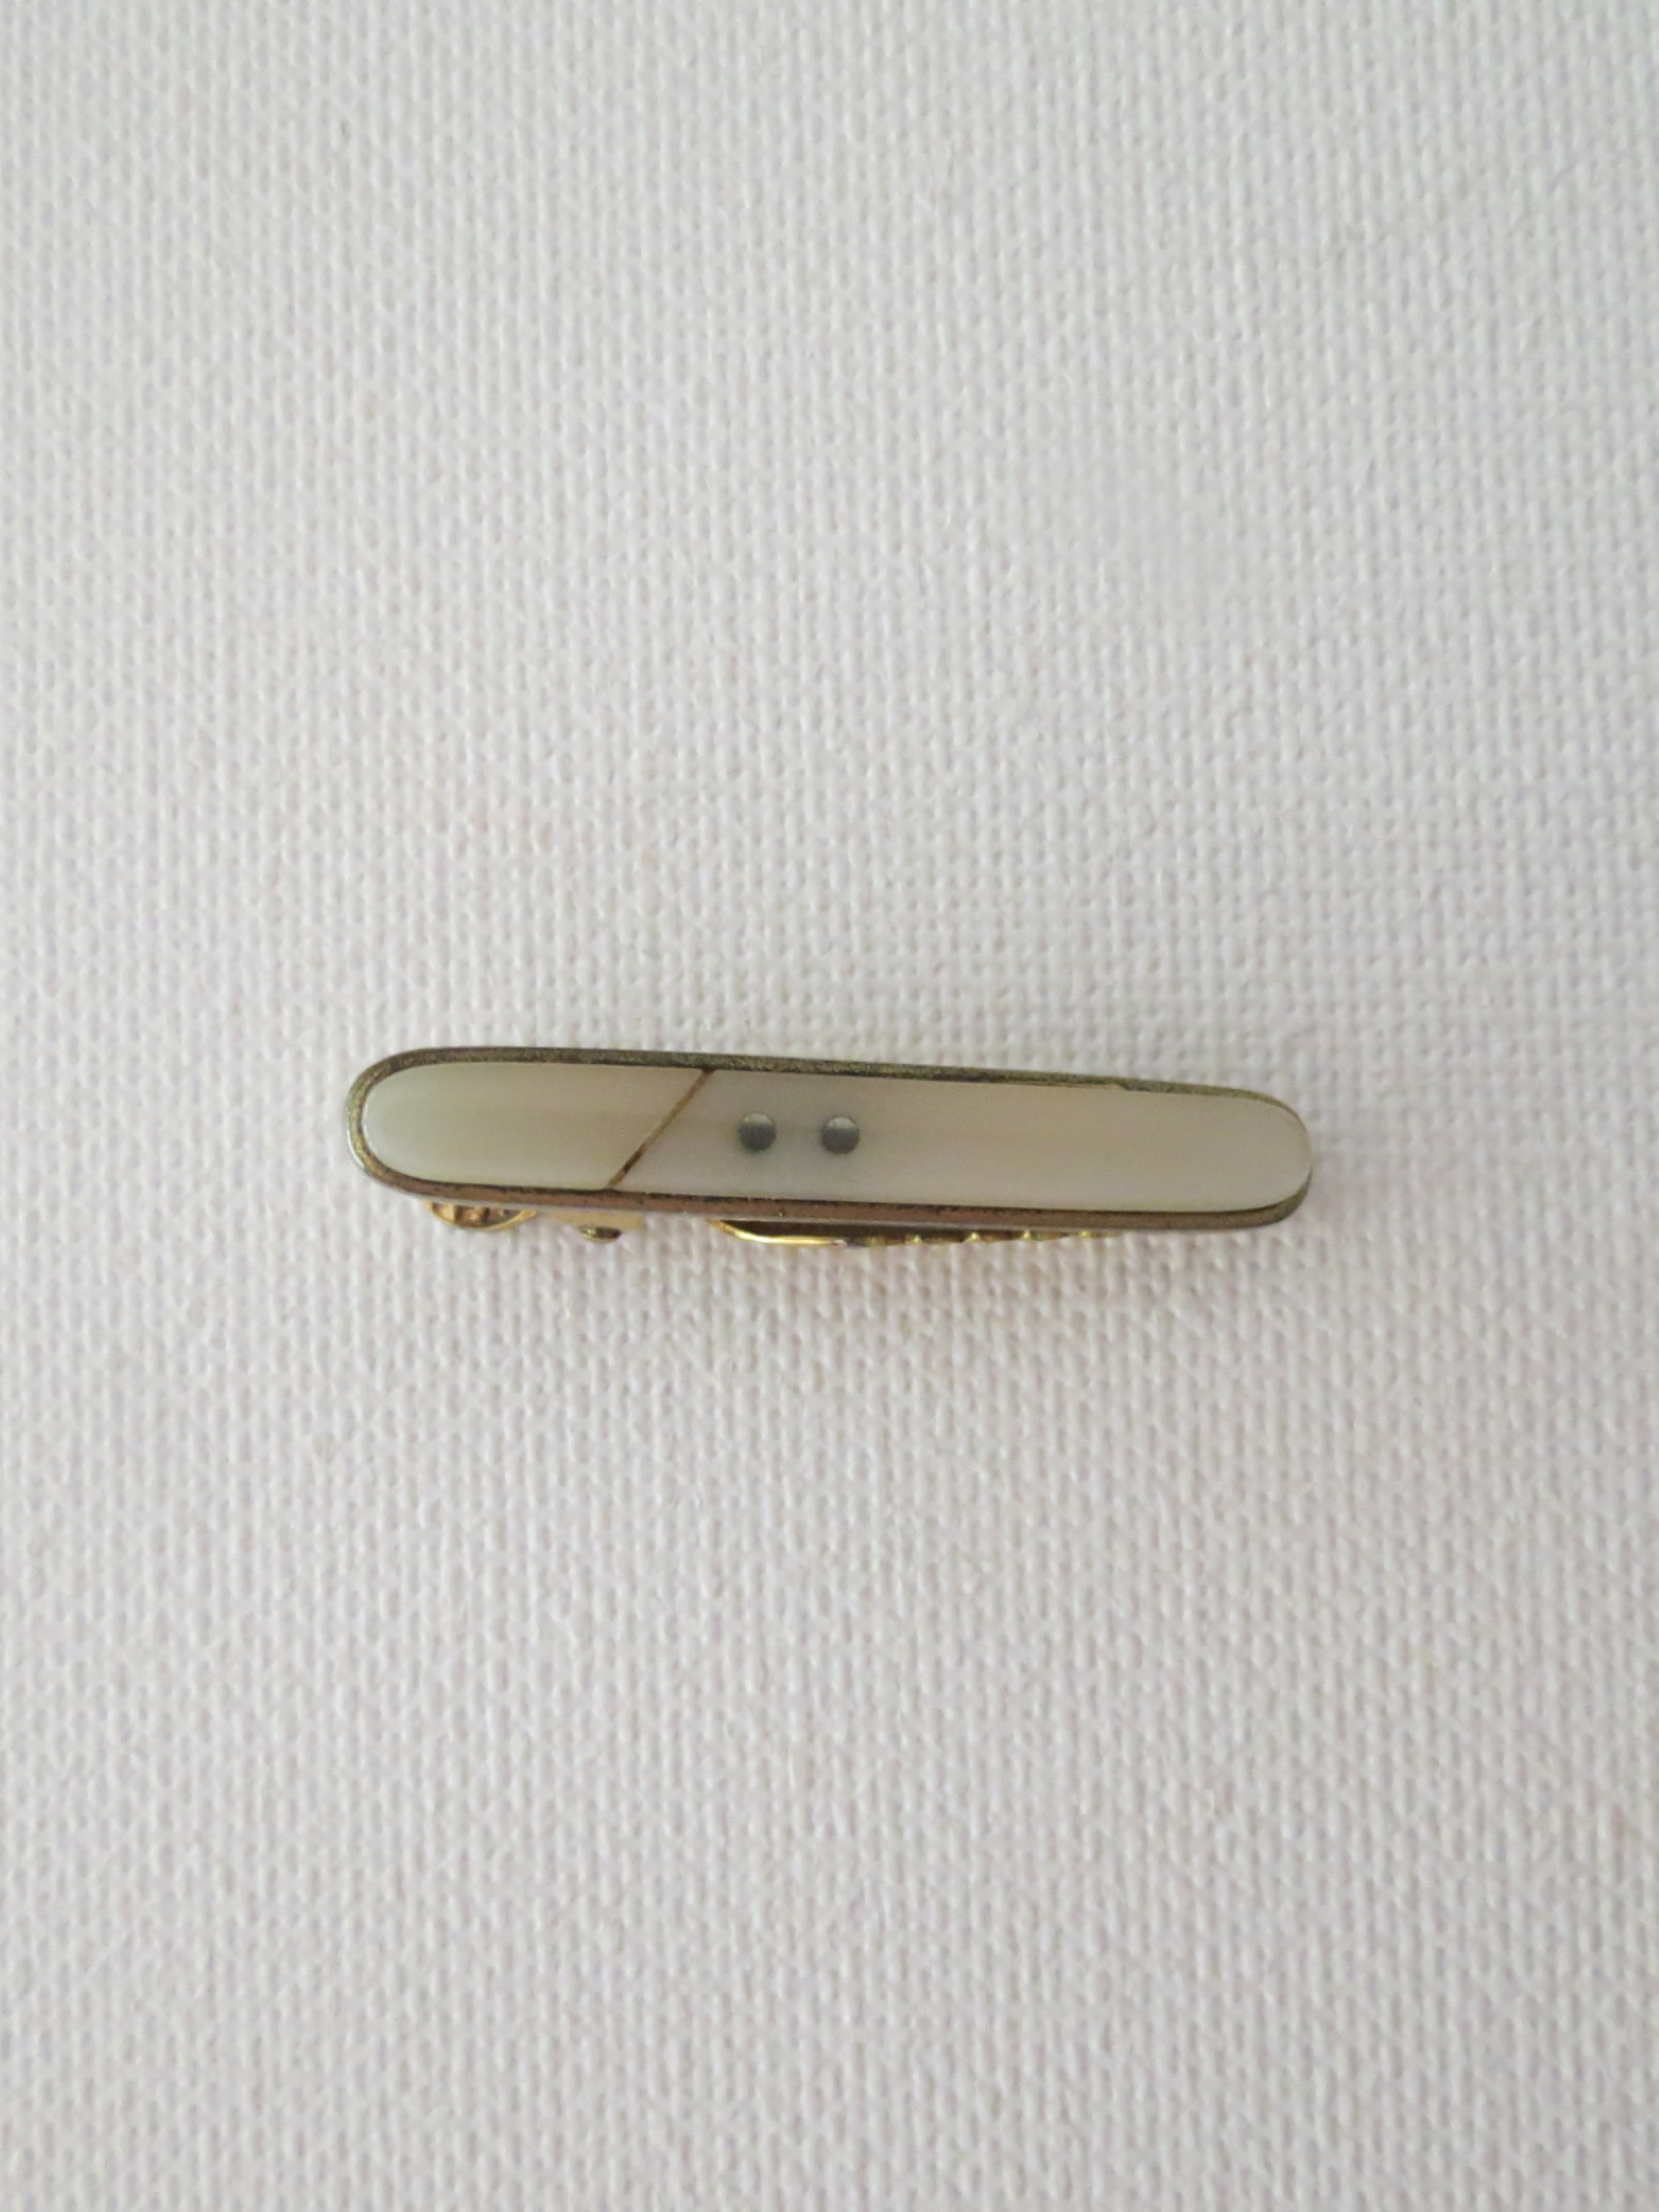 Pearl Tie Clip With Rounded Edges